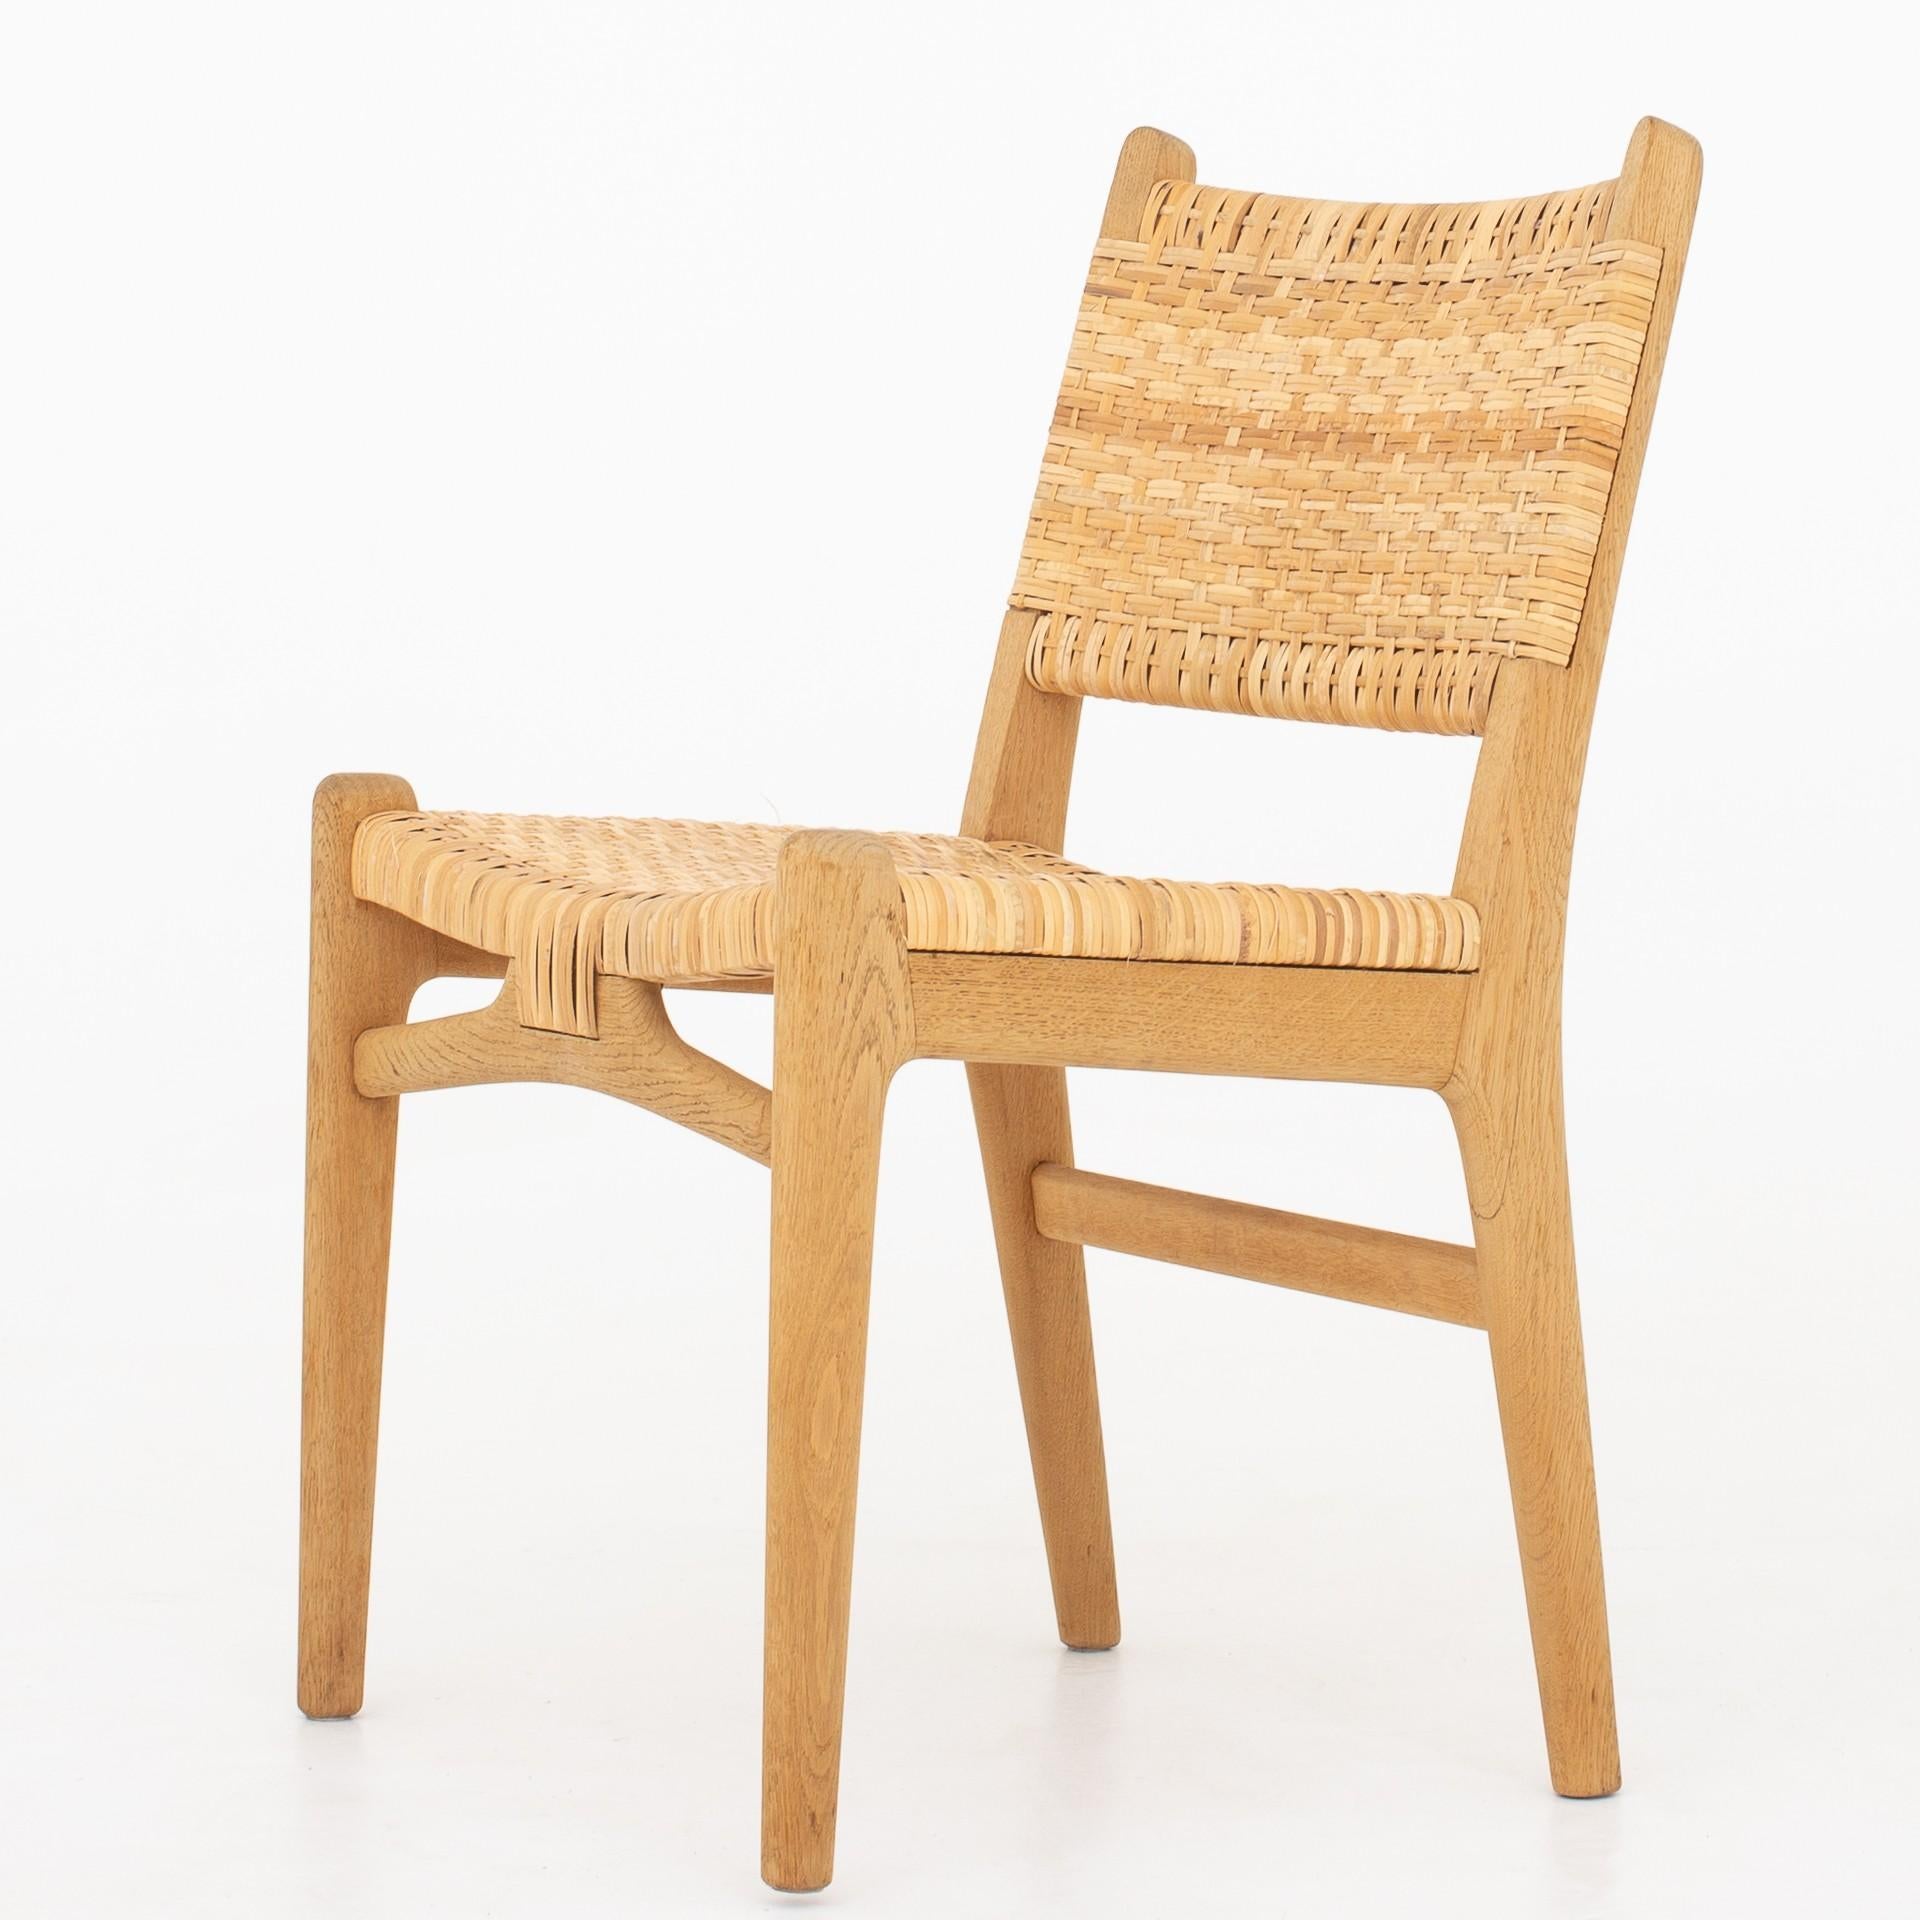 Set of two CH 31. Chairs in patinated oak and cane webbing. Maker Carl Hansen.